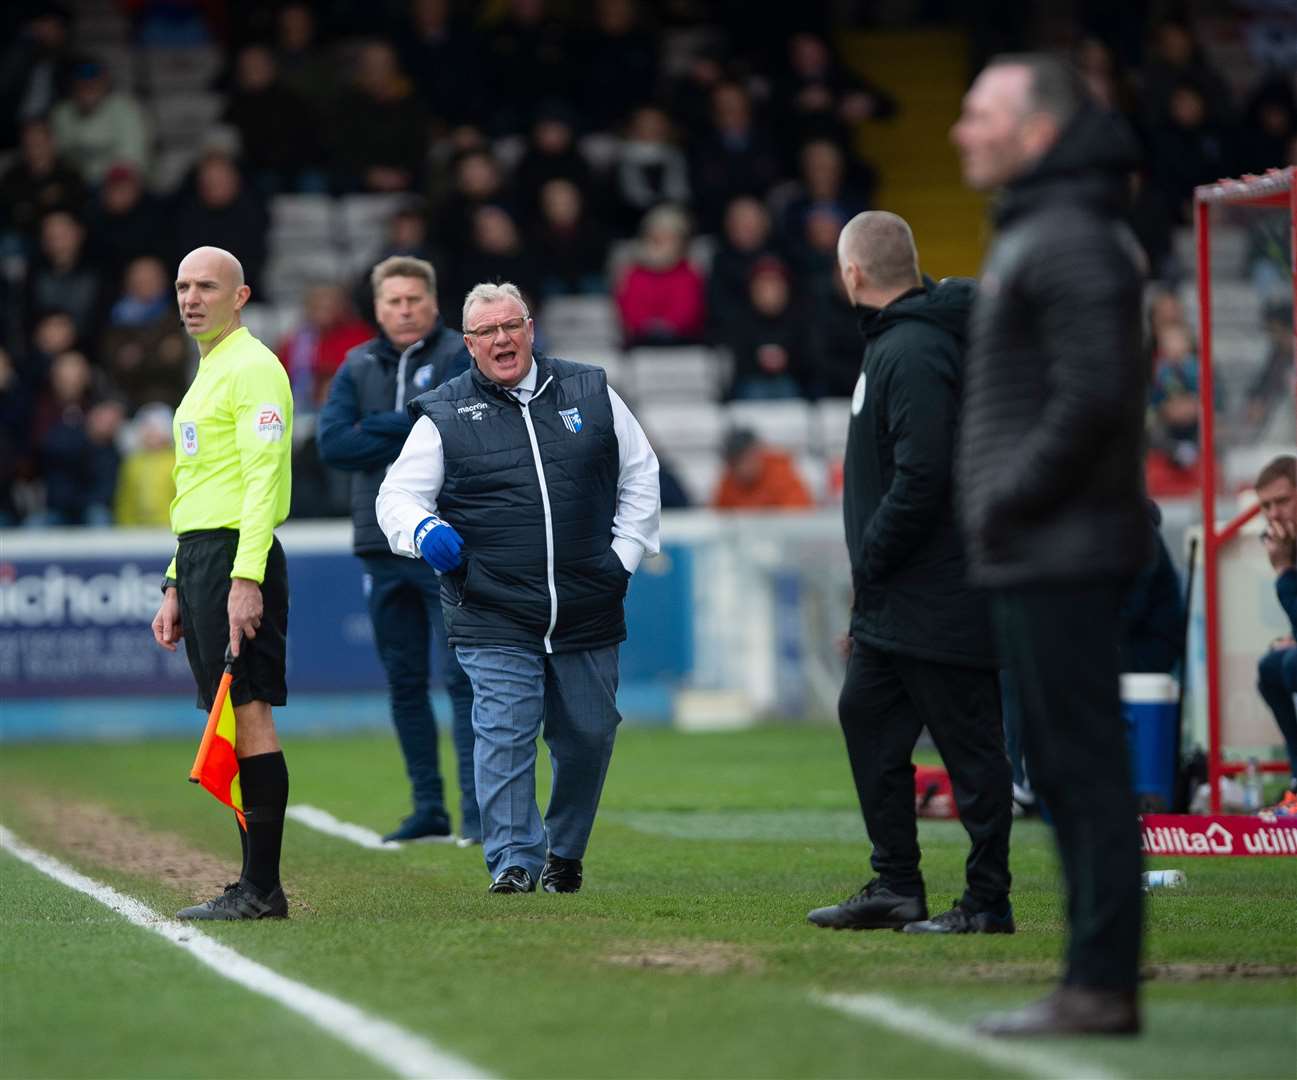 Steve Evans' side took four points off Lincoln City last season but faces a biggest test this time around